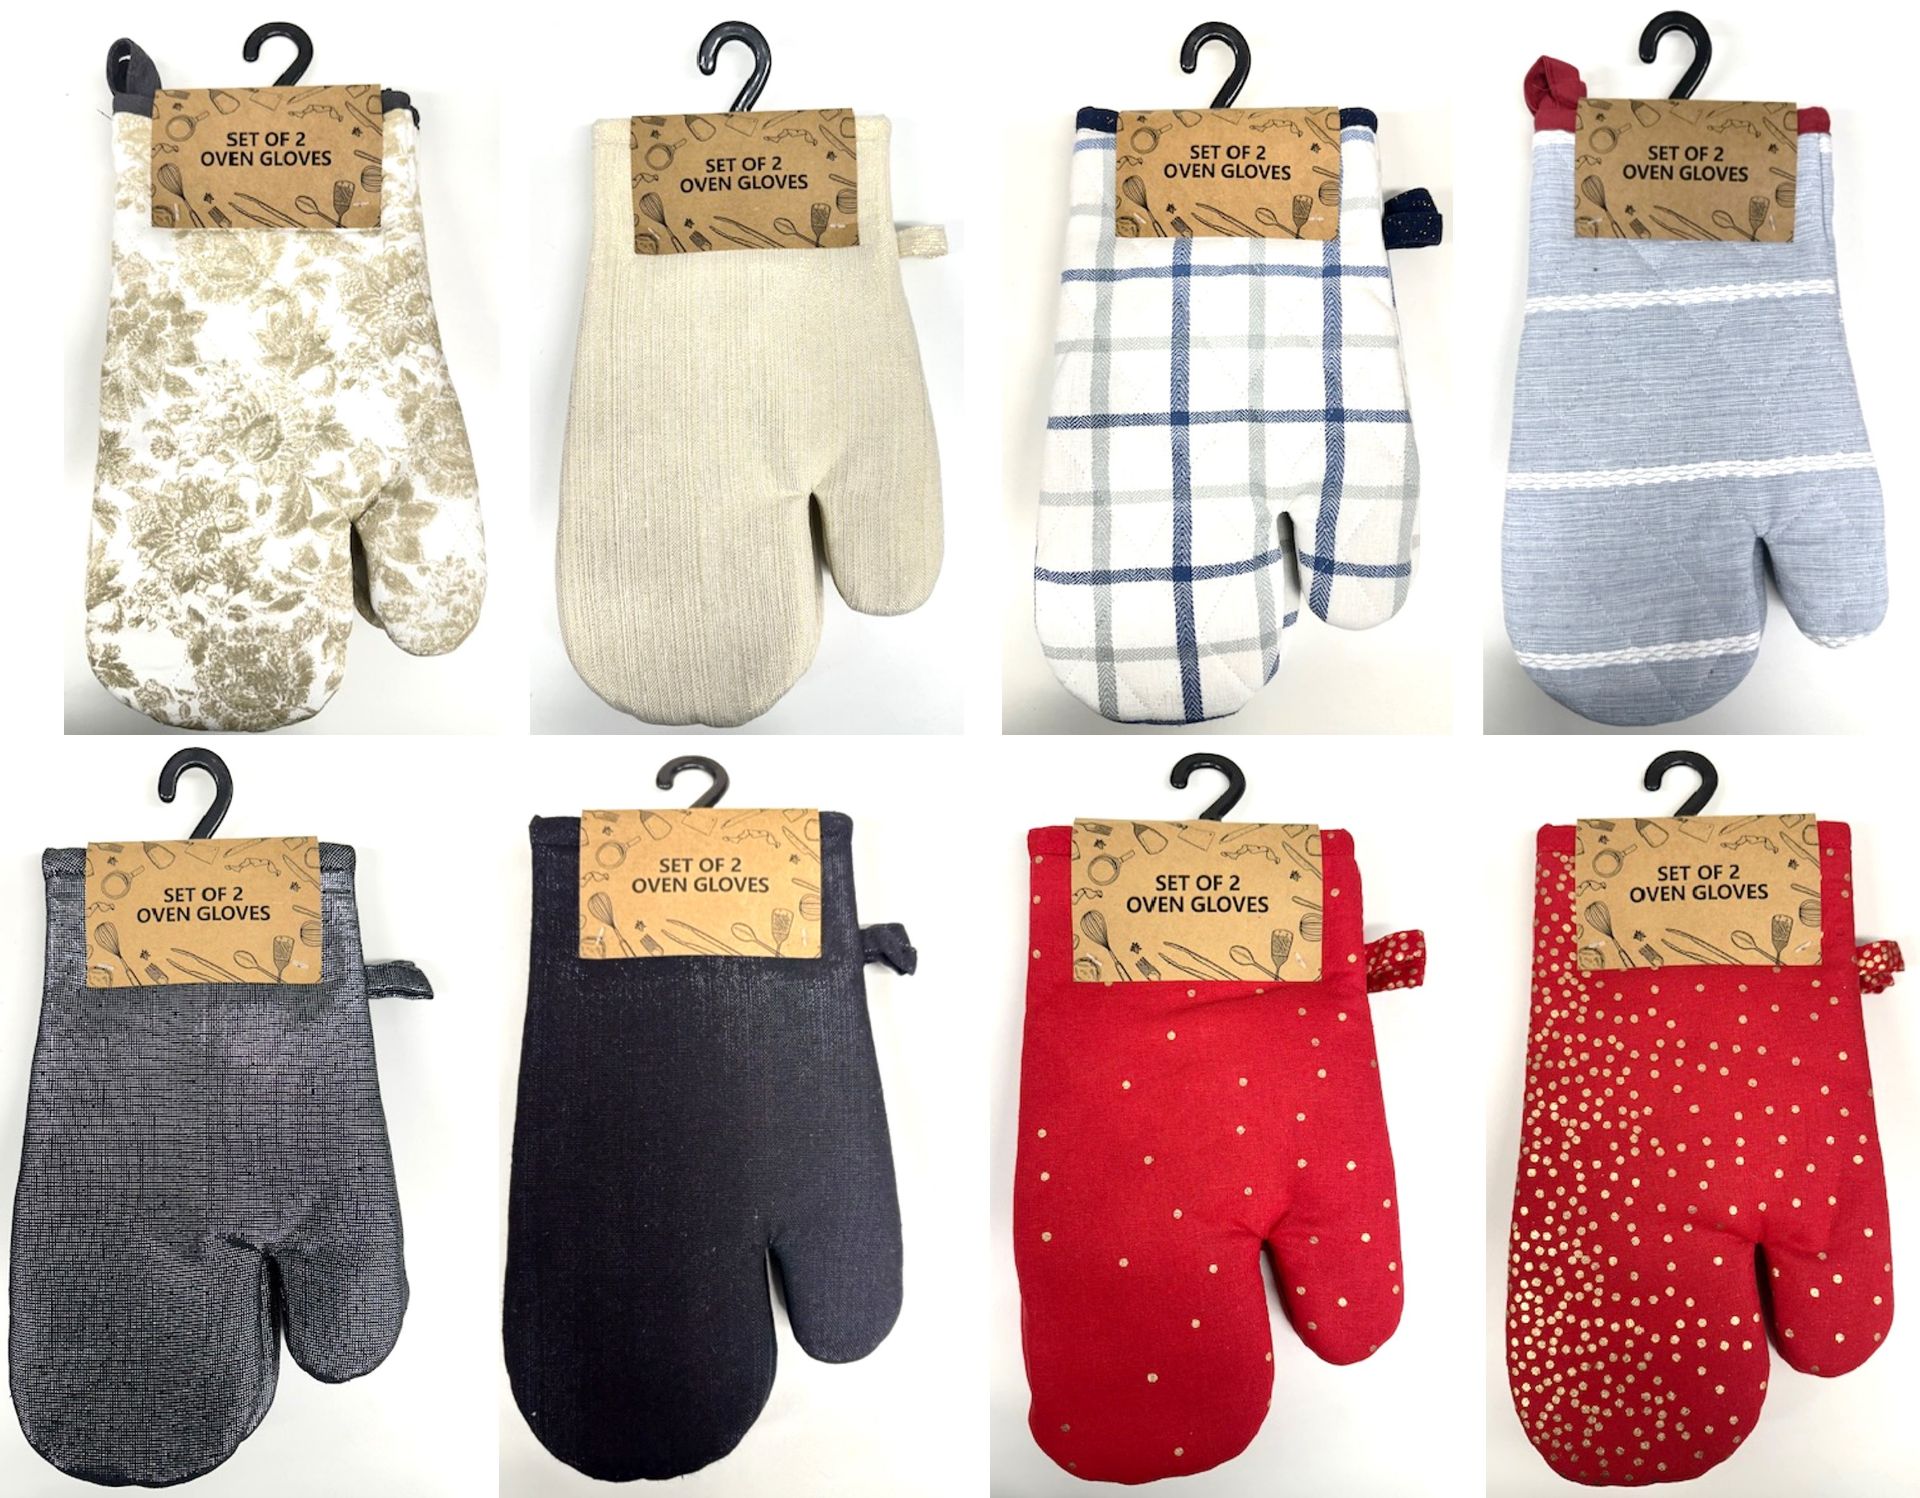 300 X SETS OF 2 OVEN GLOVES - ASSORTED COLOURS. - CHOSEN AT RANDOM RRP £1500.00